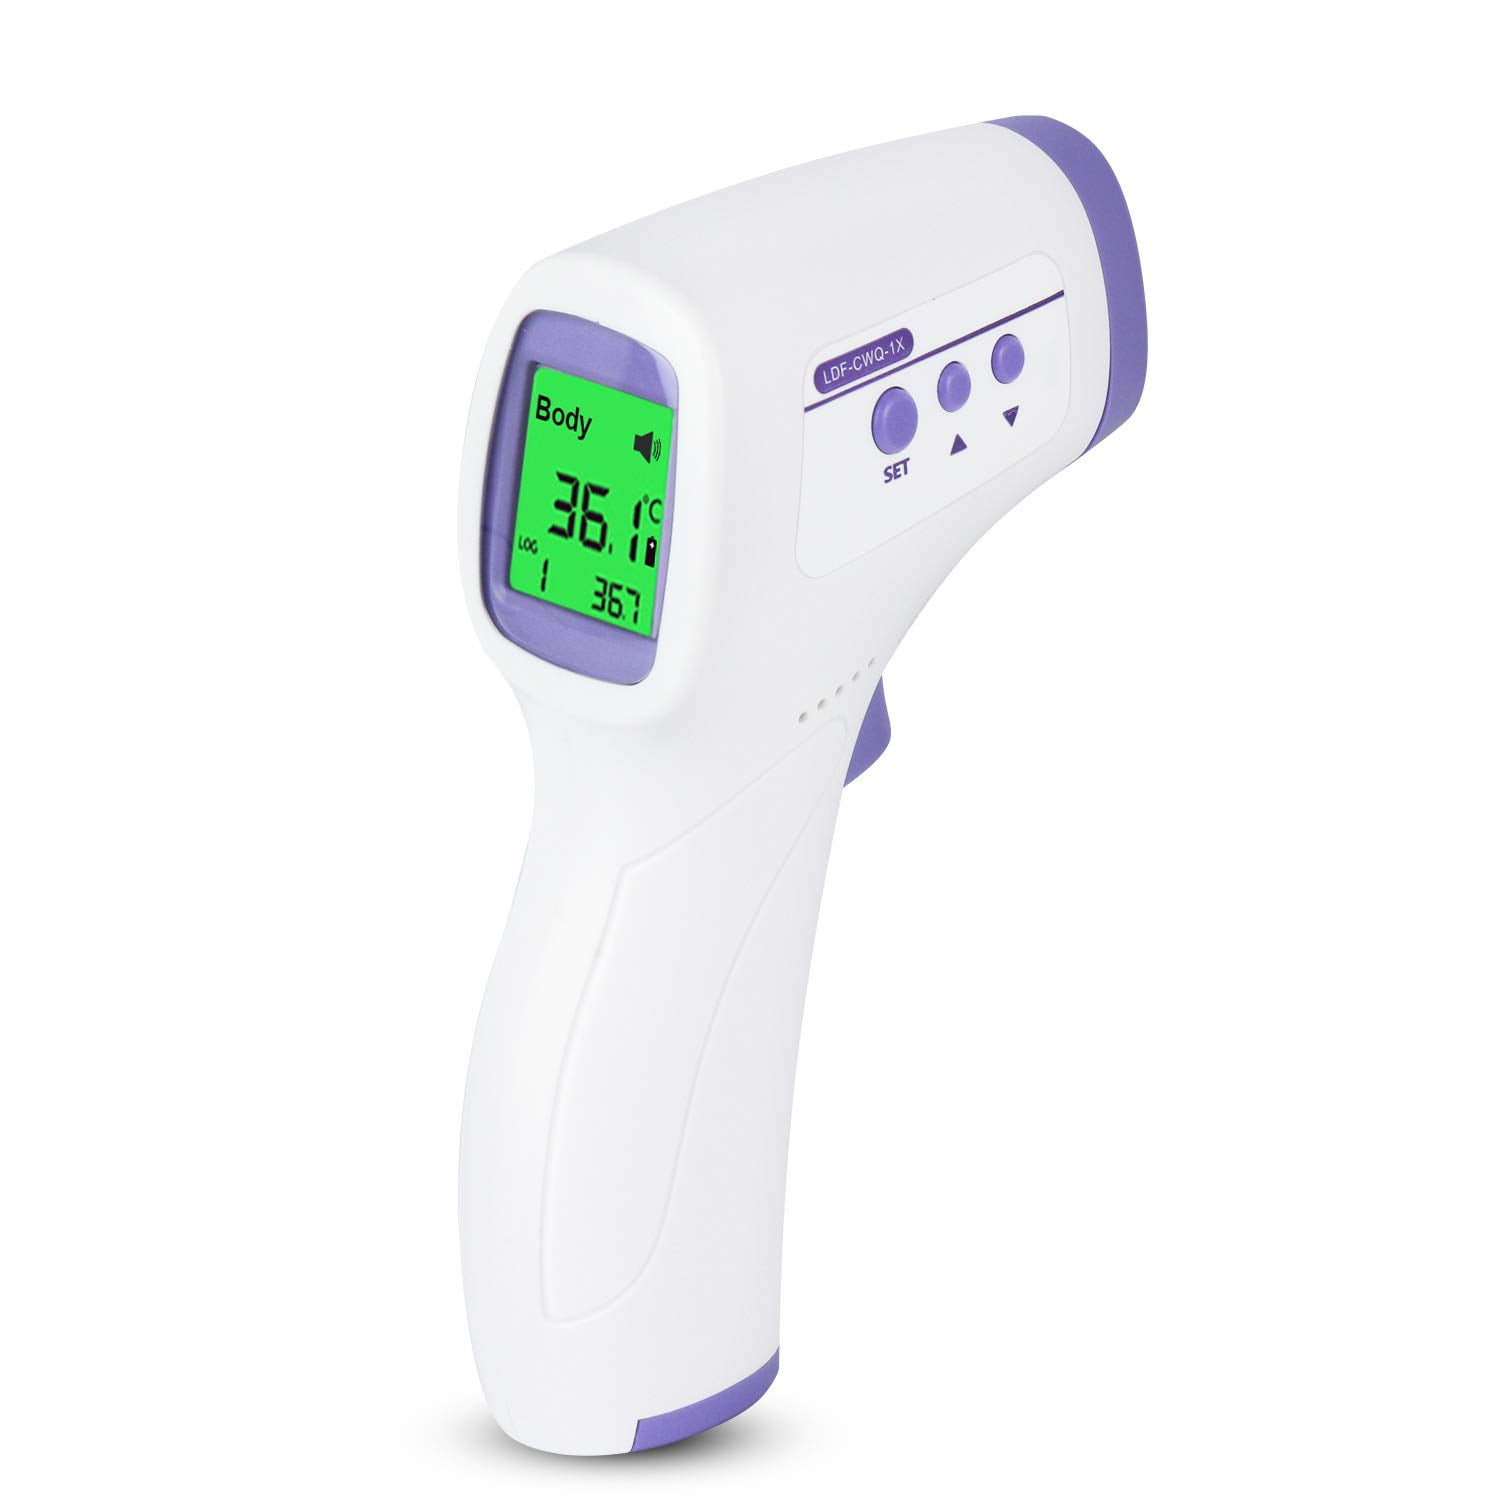 Body Thermometer Instant Accurate Reading for Fever Non Contact Forehead Digital Thermometer for Adults Kids and Baby Medical Infrared Thermometers with LCD Display